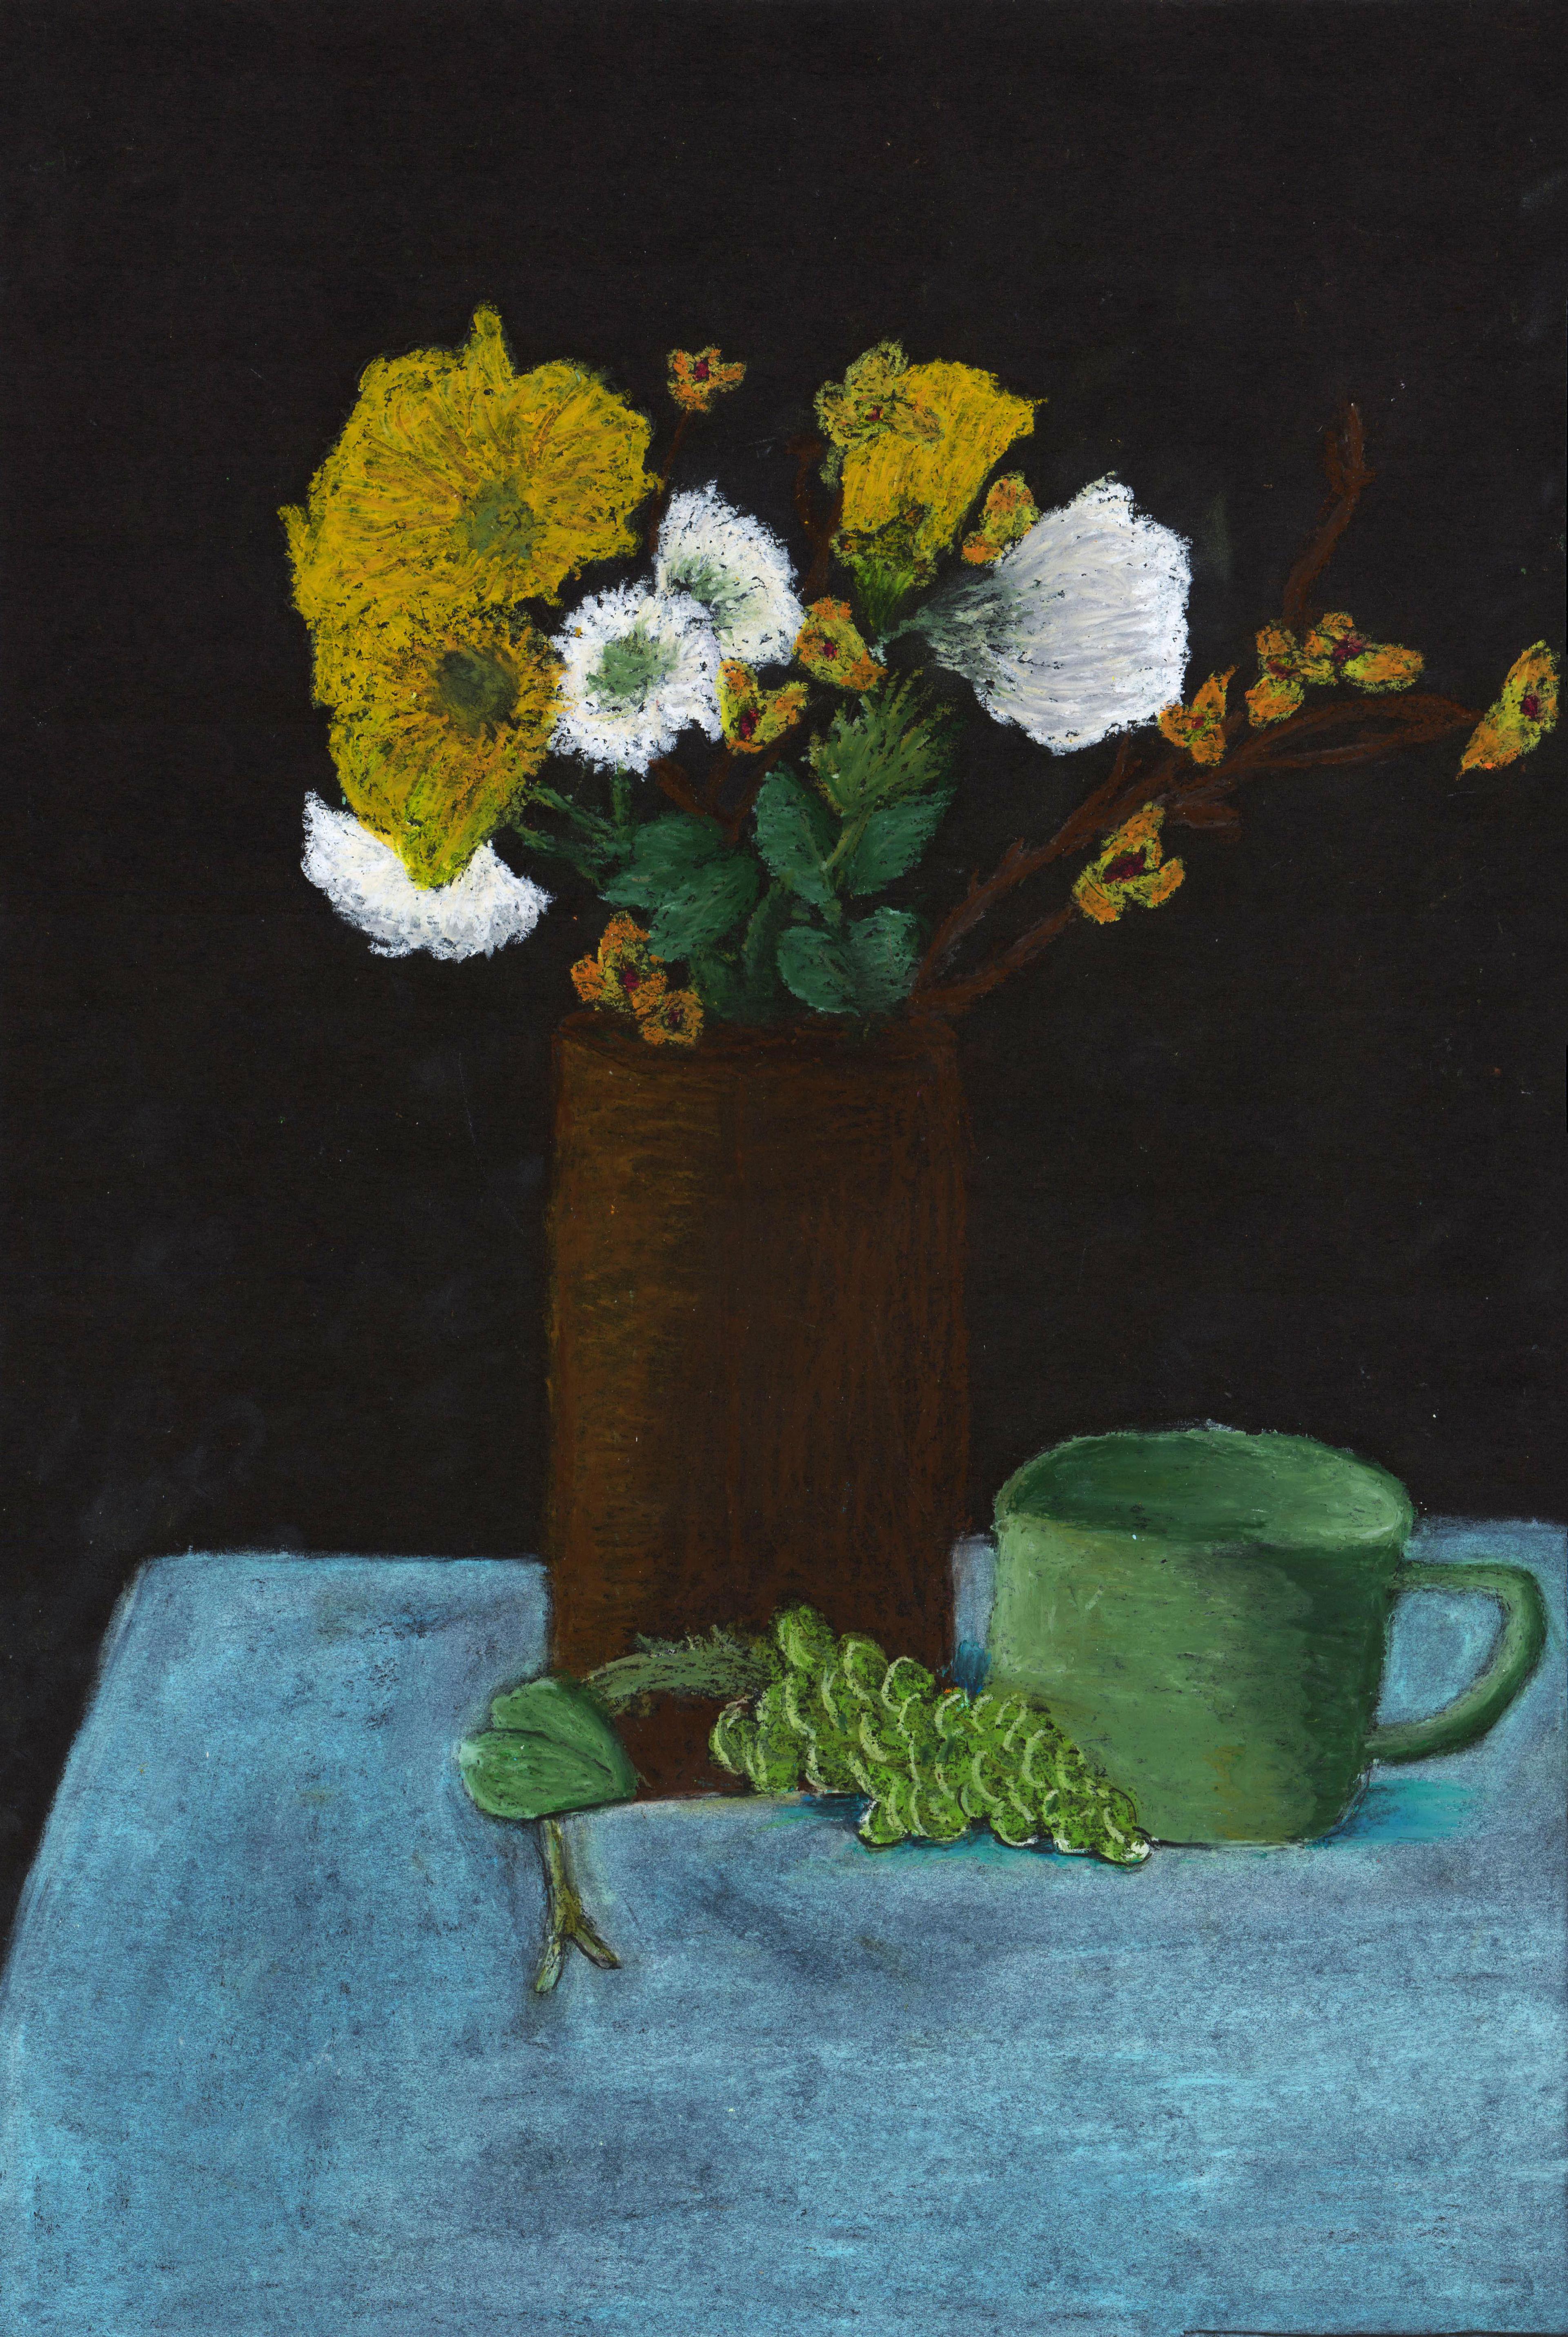 Oil-on–pastel paper painting of a tall brown vase on a blue tablecloth containing numerous white and yellow flowers with green leaves. A bunch of green grapes sits in front of the vase, with a green mug sitting slightly to the right. The dark background is nearly black.